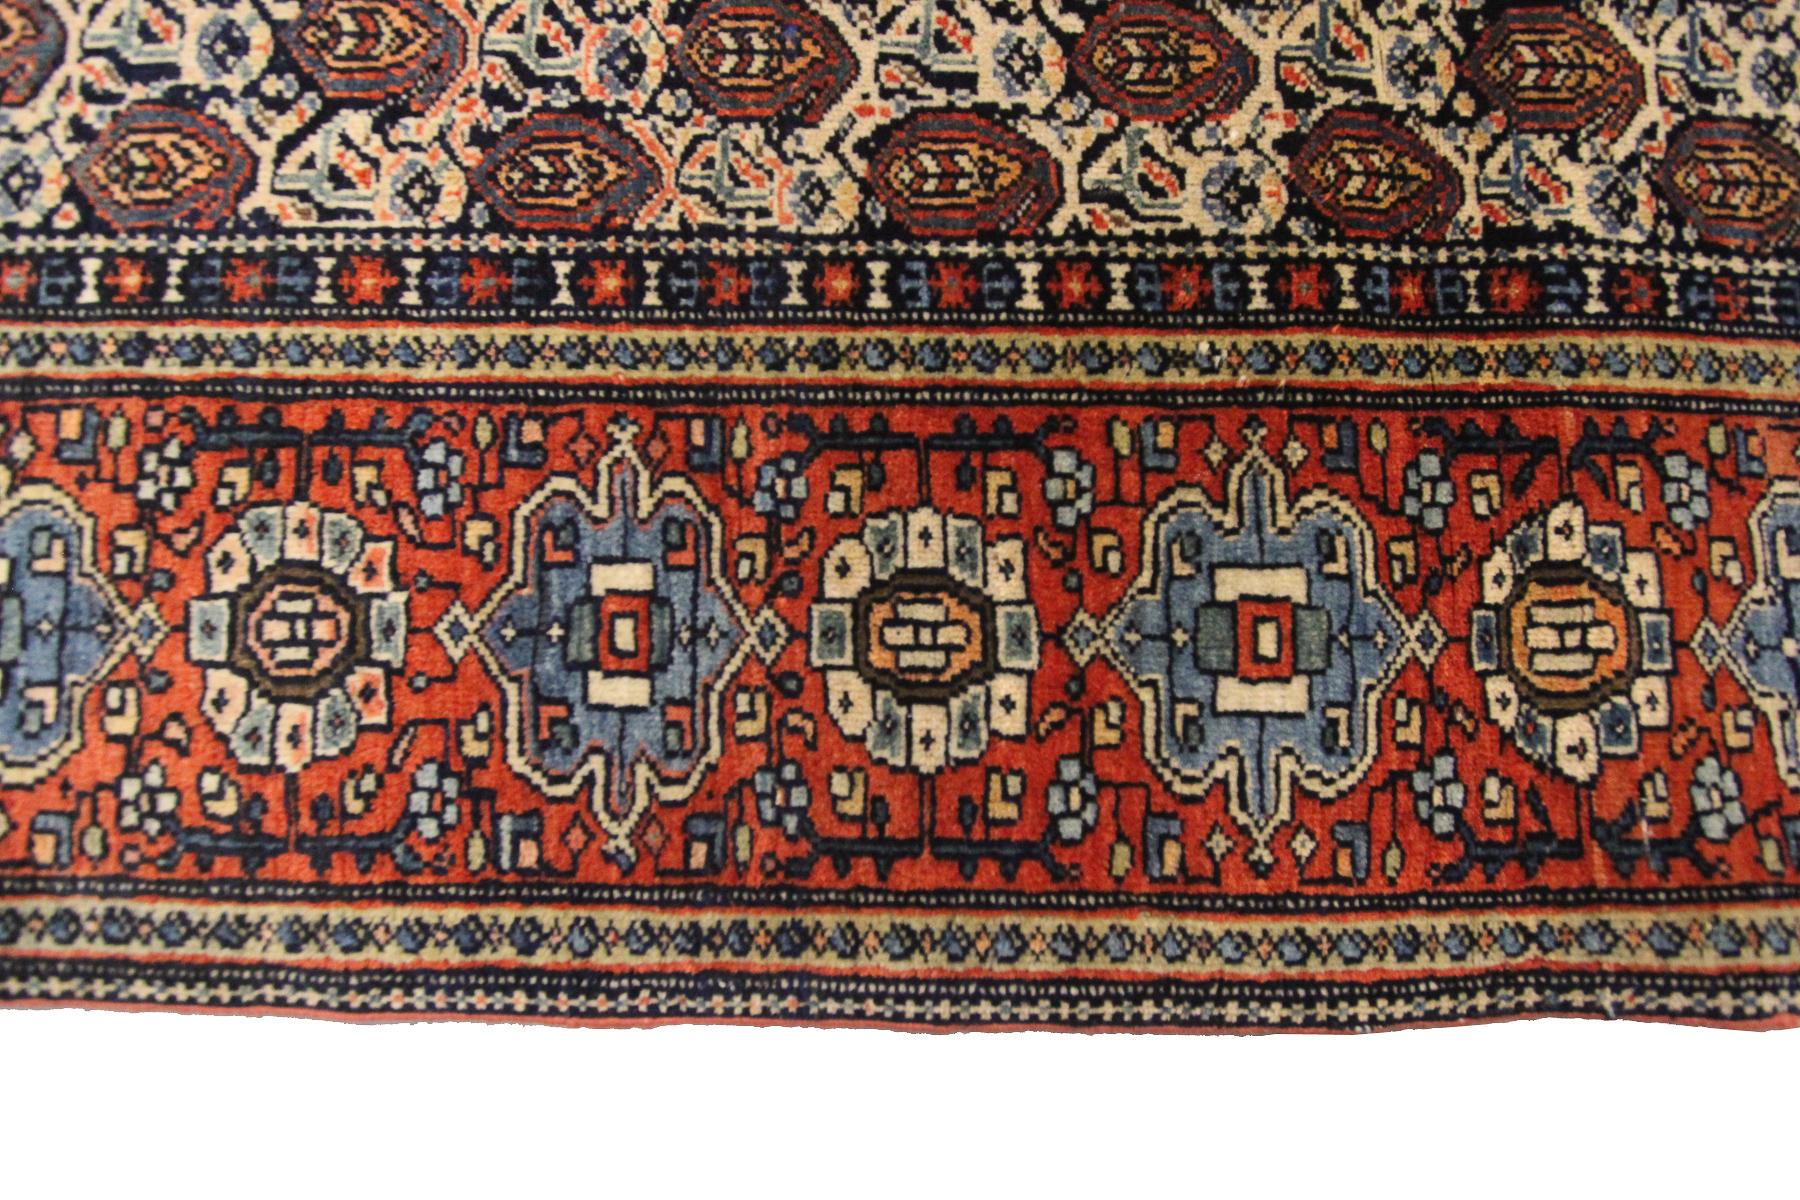 Wool 1890 Antique Persian Rug Antique Persian Rug Sarouk Farahan Geometric Overall For Sale